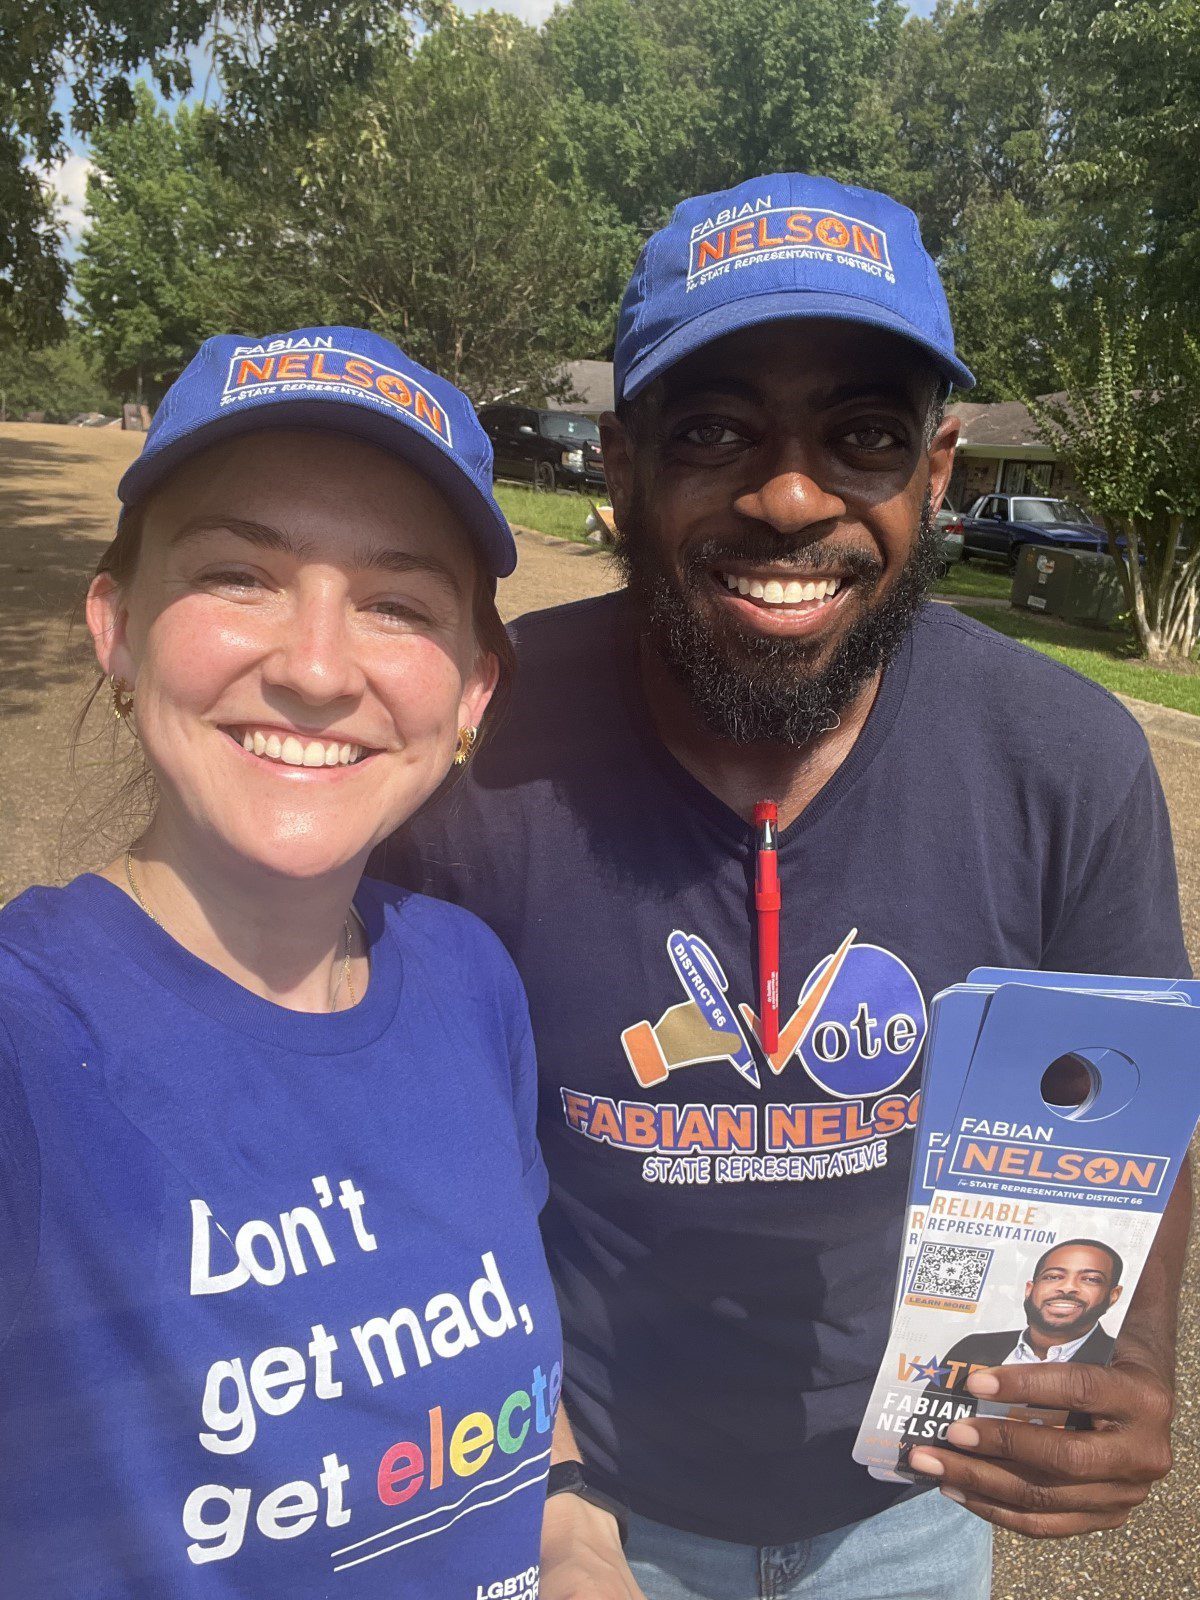 Canvassing with Fabian Nelson